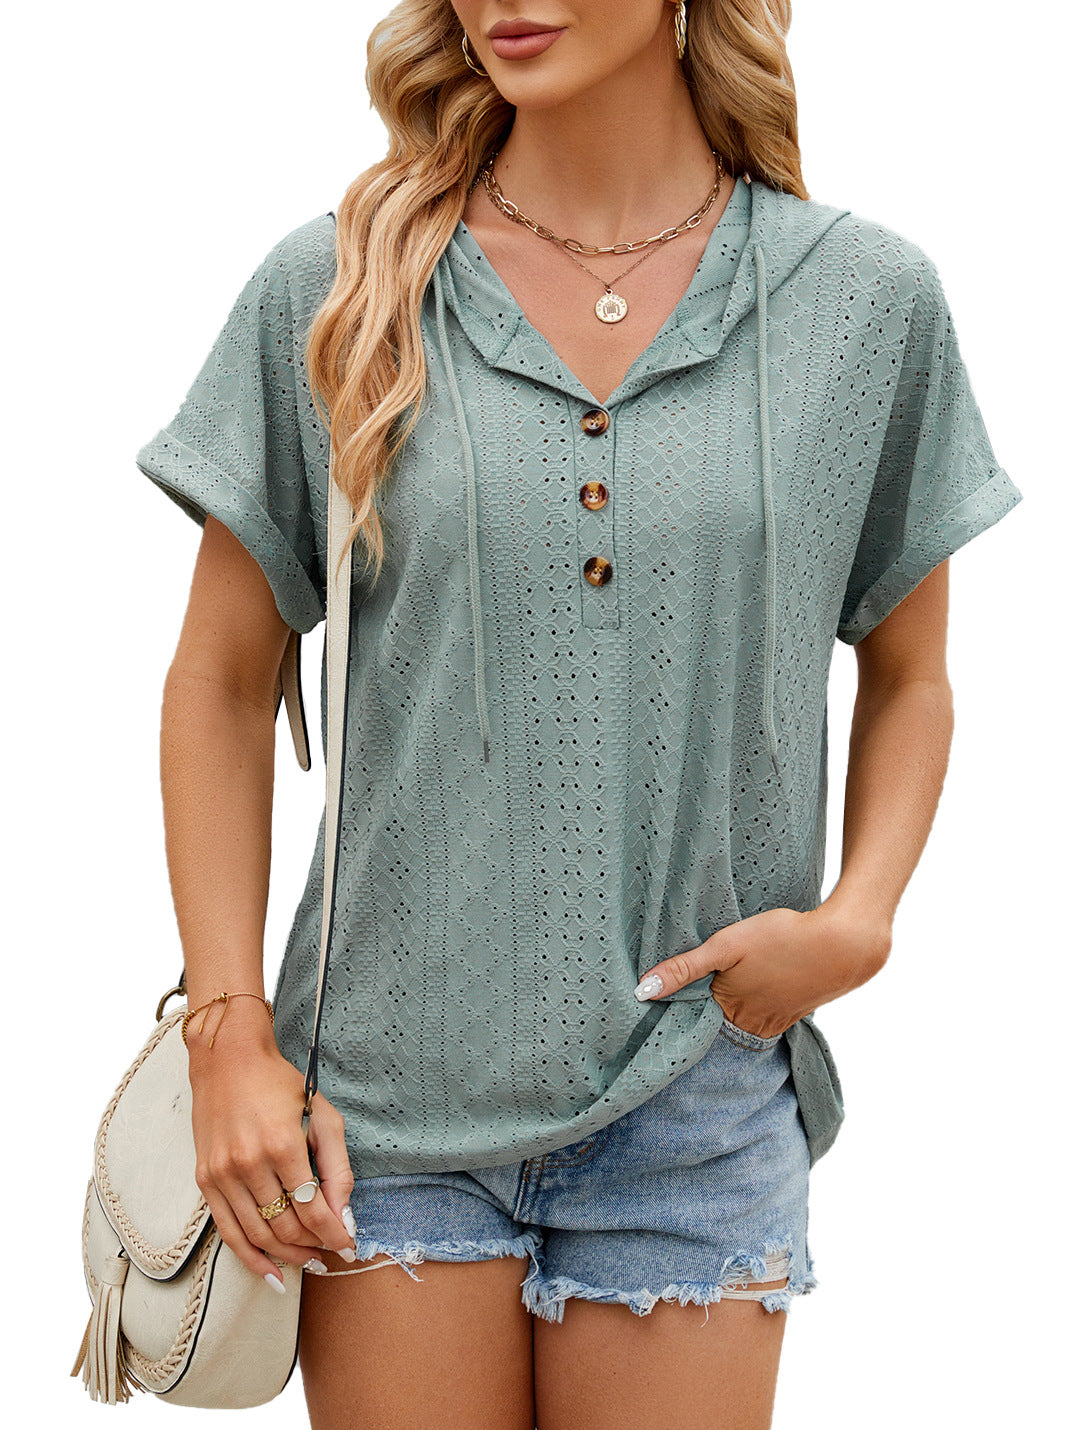 New Solid Color Hooded Button T-shirt Loose Hollow Design Short-sleeved Top For Womens Clothing